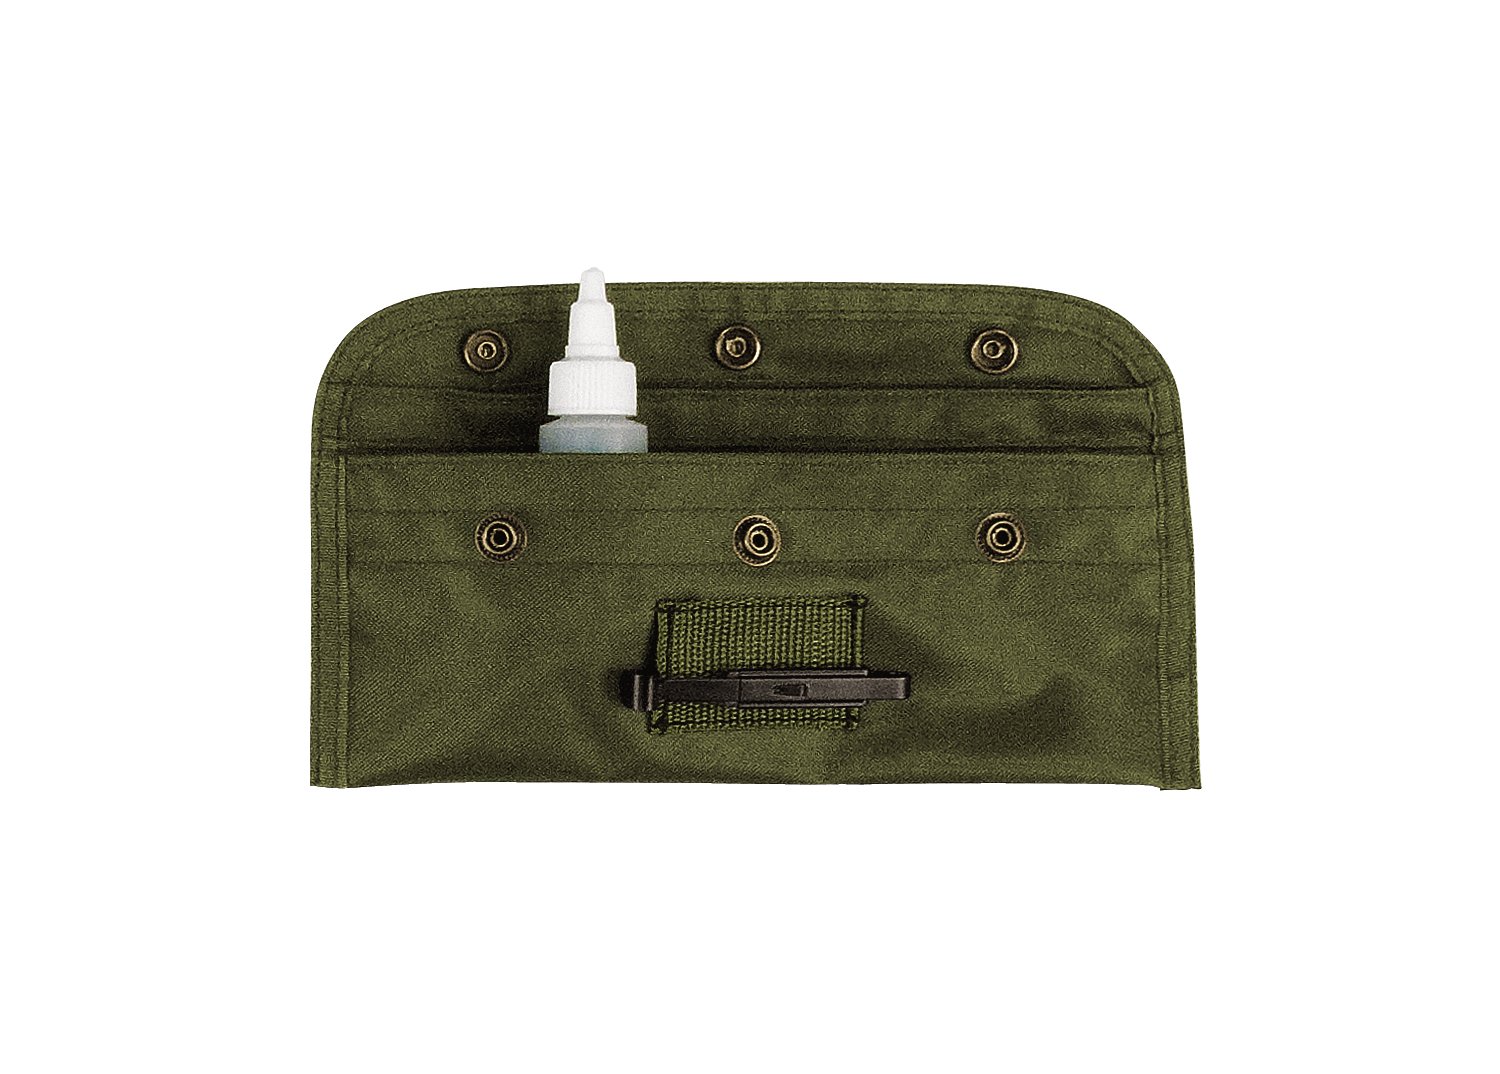 Rothco G.I. Plus Rifle Cleaning Kit - Tactical Choice Plus